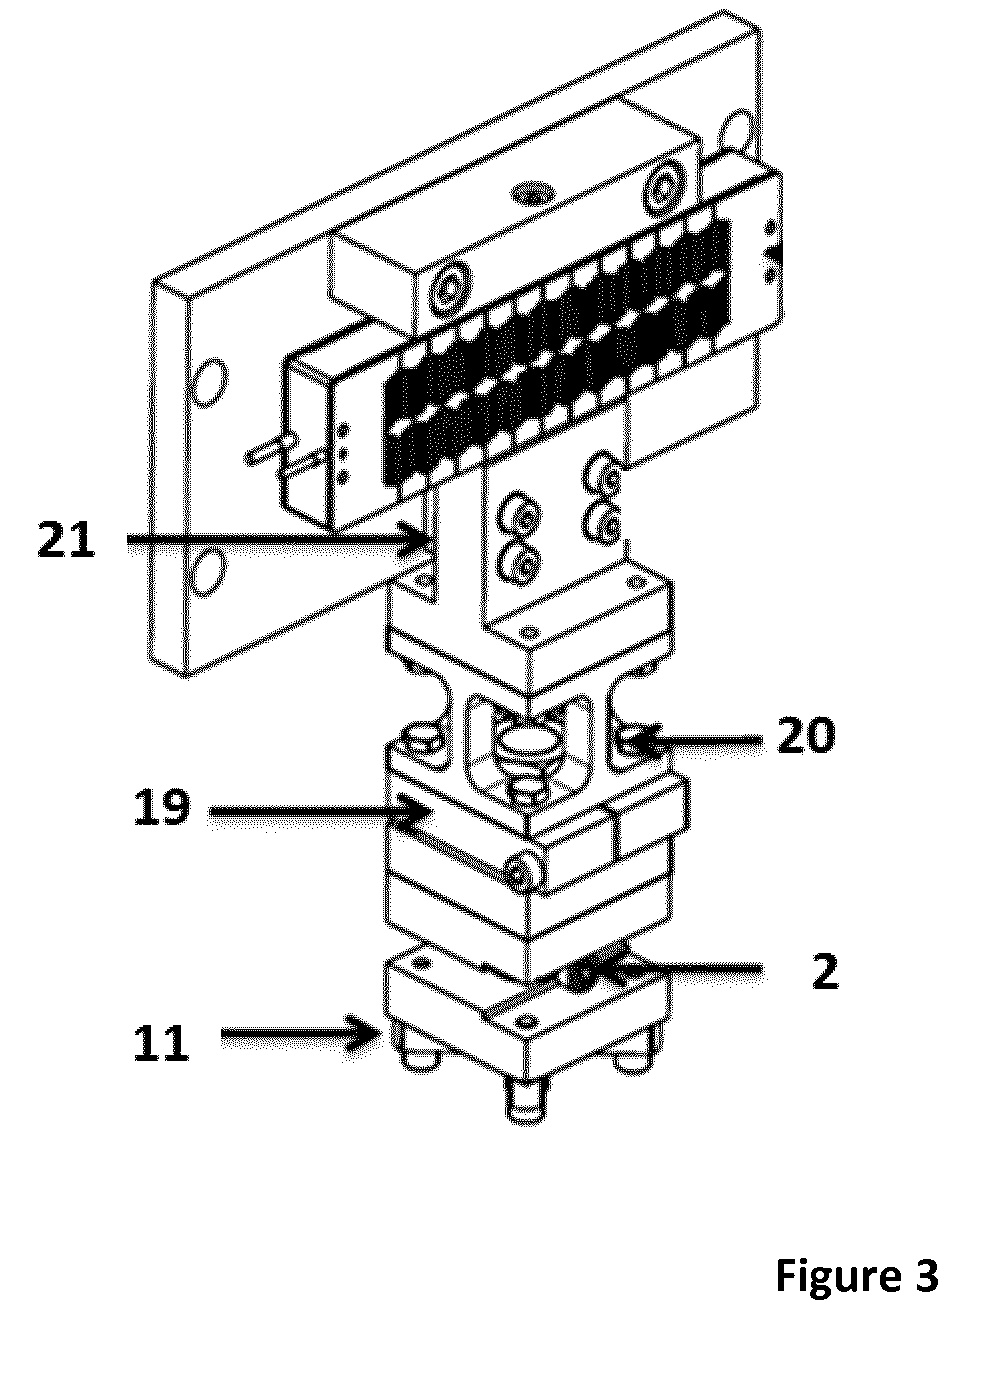 Device for measuring rubber wear